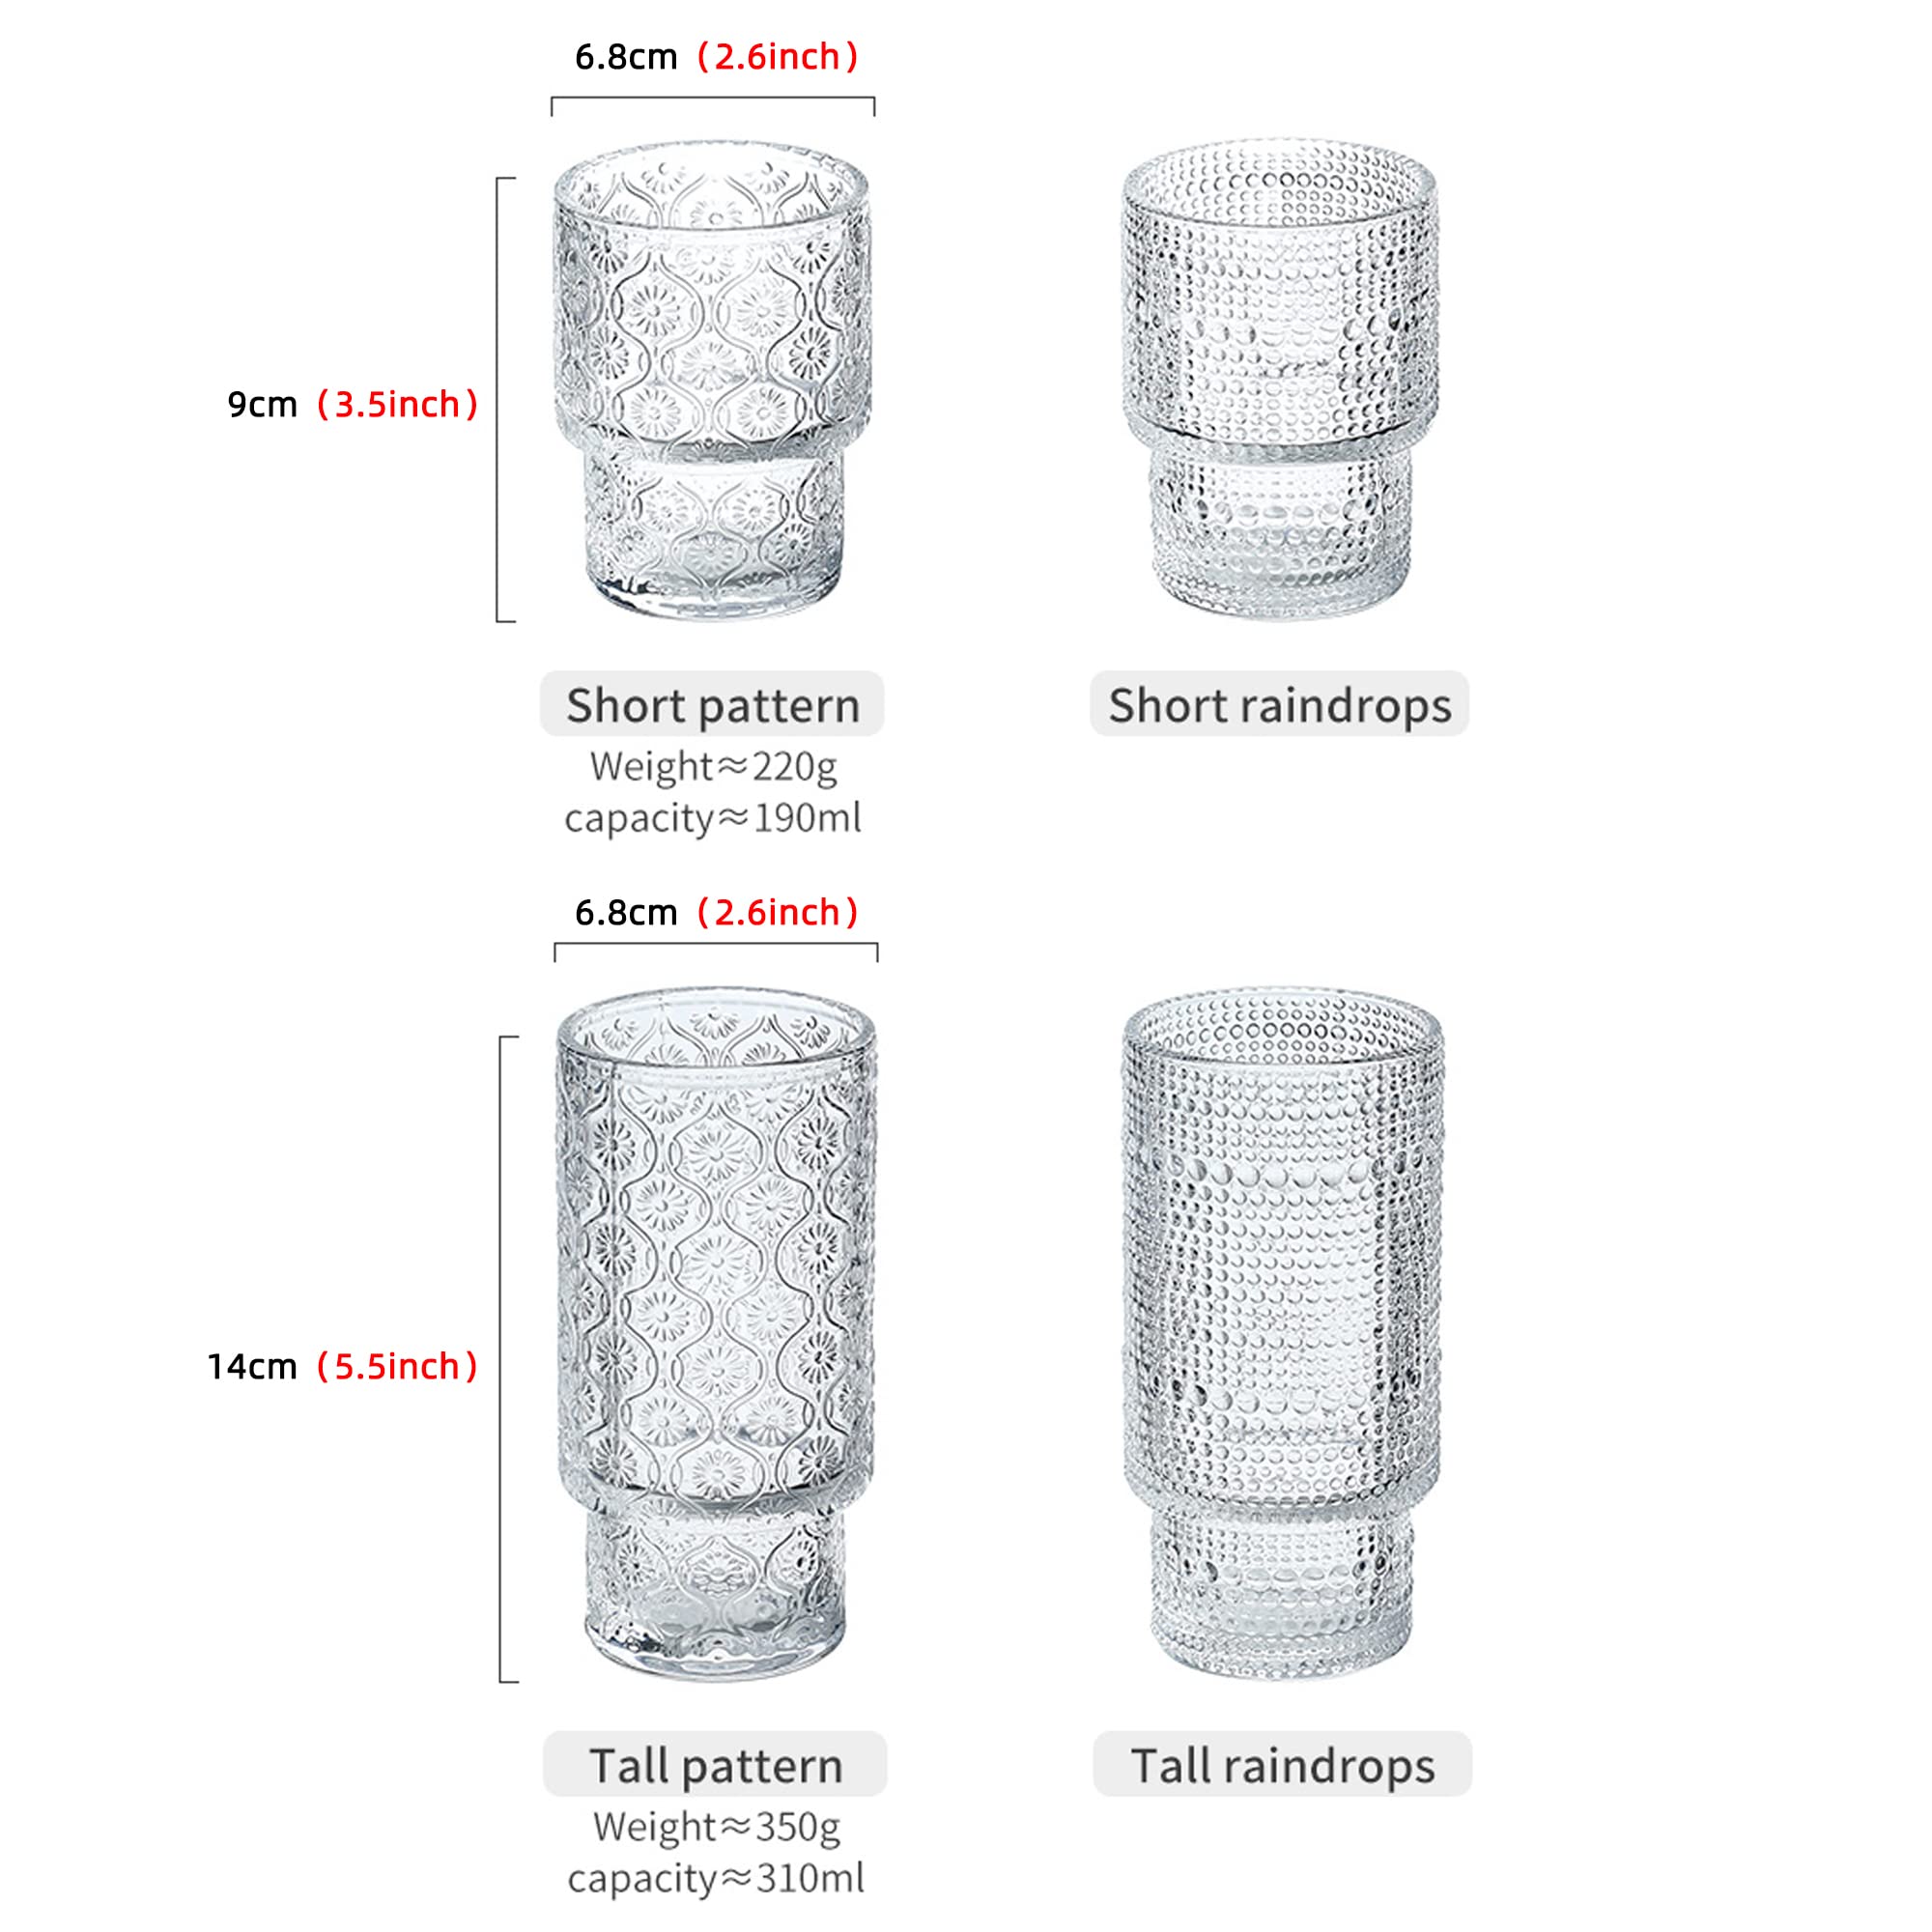 POLIDREAM Vintage Glassware Set of 4 pcs Glass Cups, 2 Embossed Stackable Pattern Style & 2 Raindrop Origami Style, Elegant Old Fashioned Glasses, Ideal for Whiskey, Cocktail, Ice Coffee, Beer